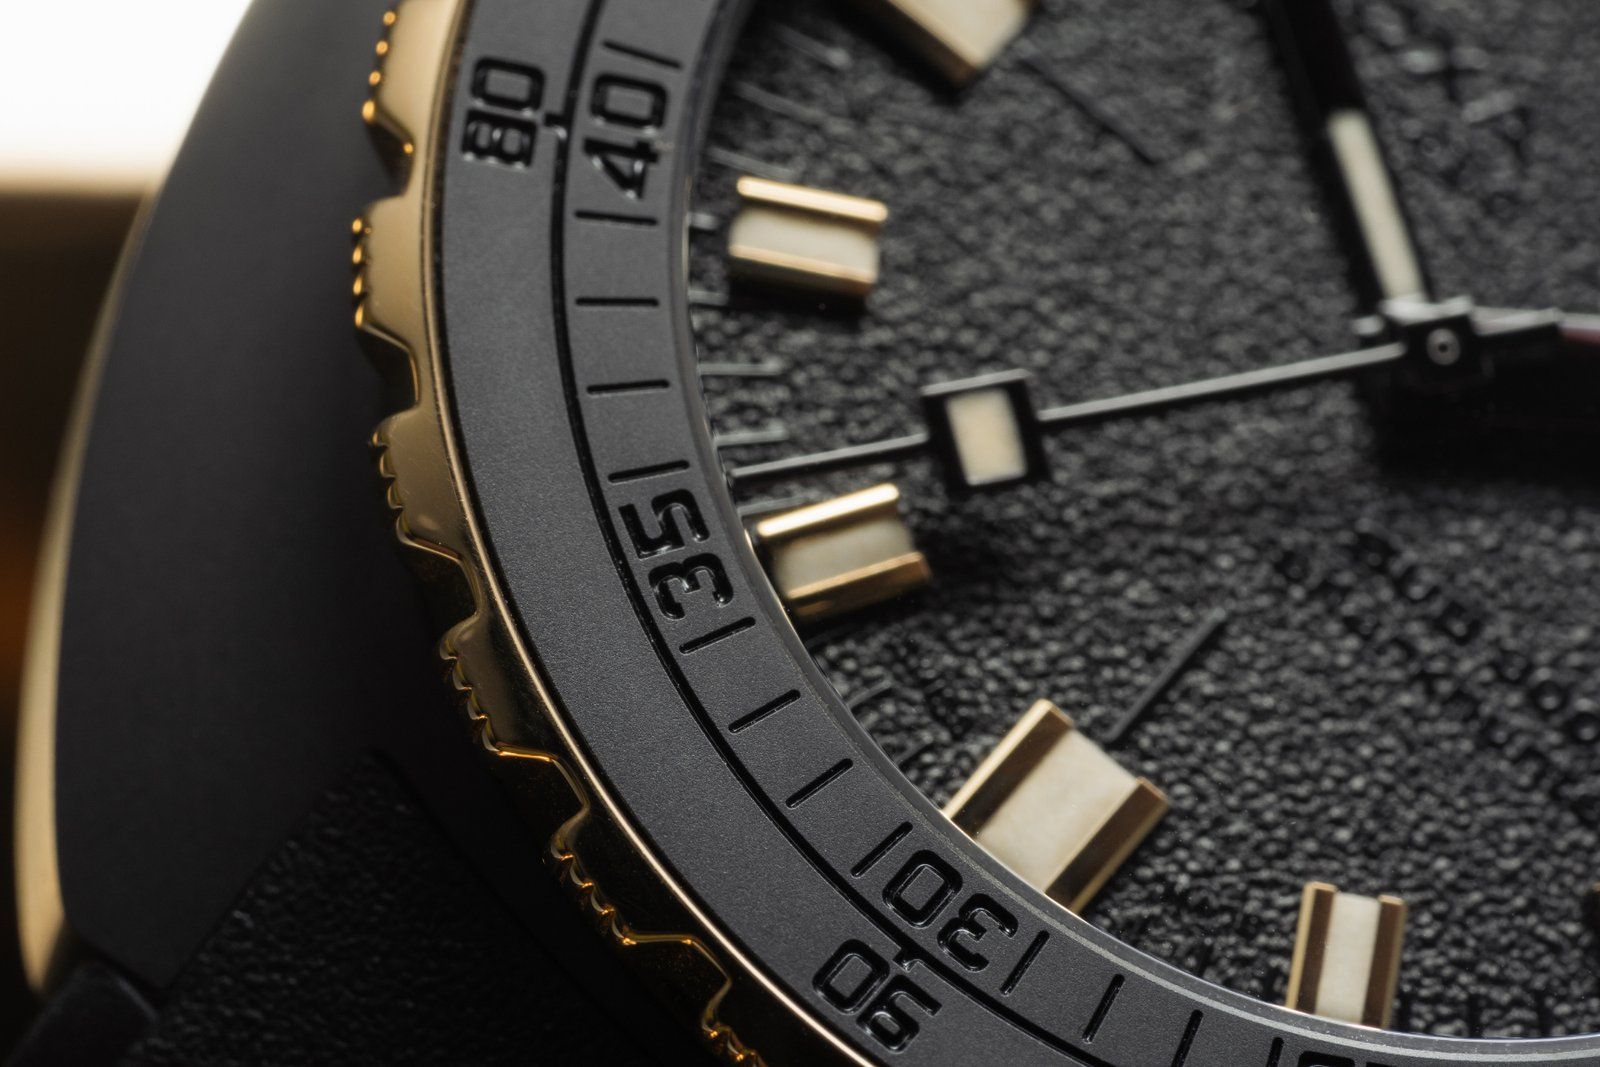 Doxa has achieved a contrasting hue by the use of cutting-edge materials and technology